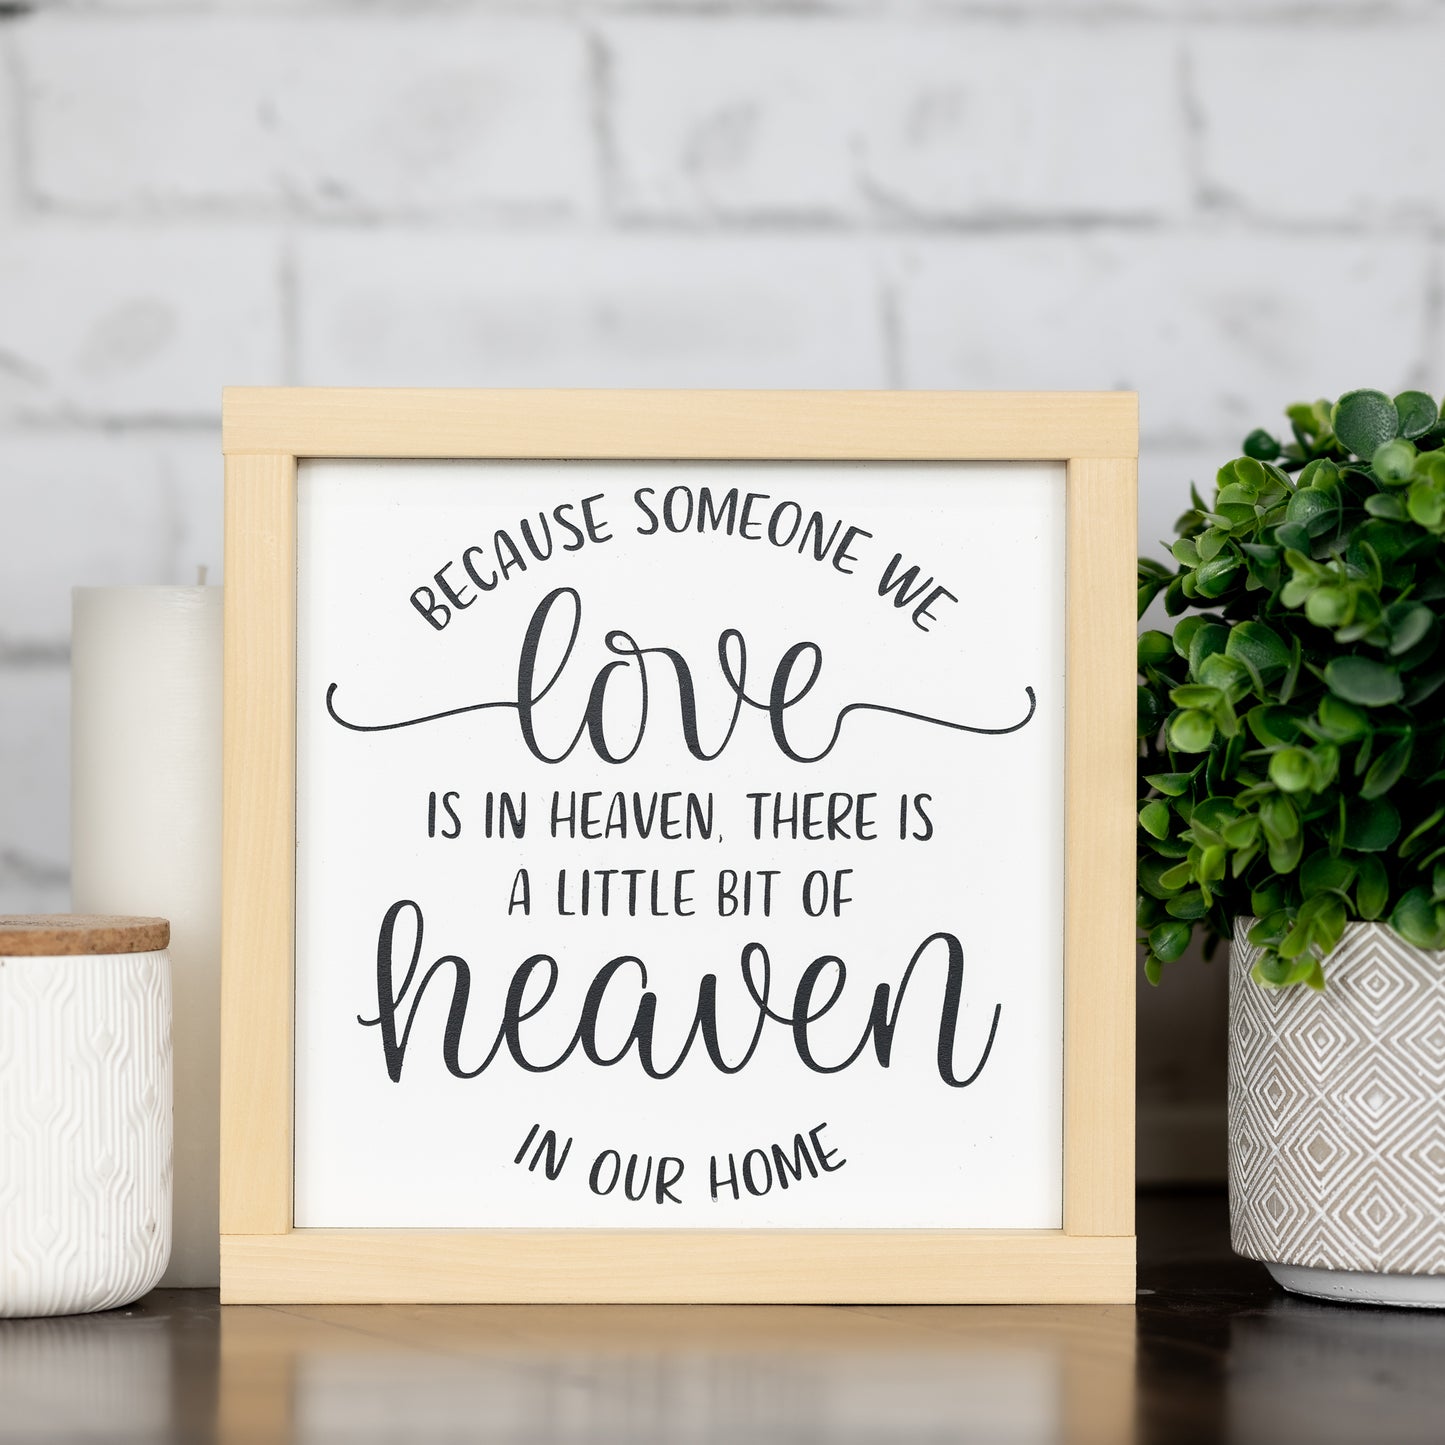 because someone we love is in heaven, there is a little bit of heaven in our home ~ wood sign